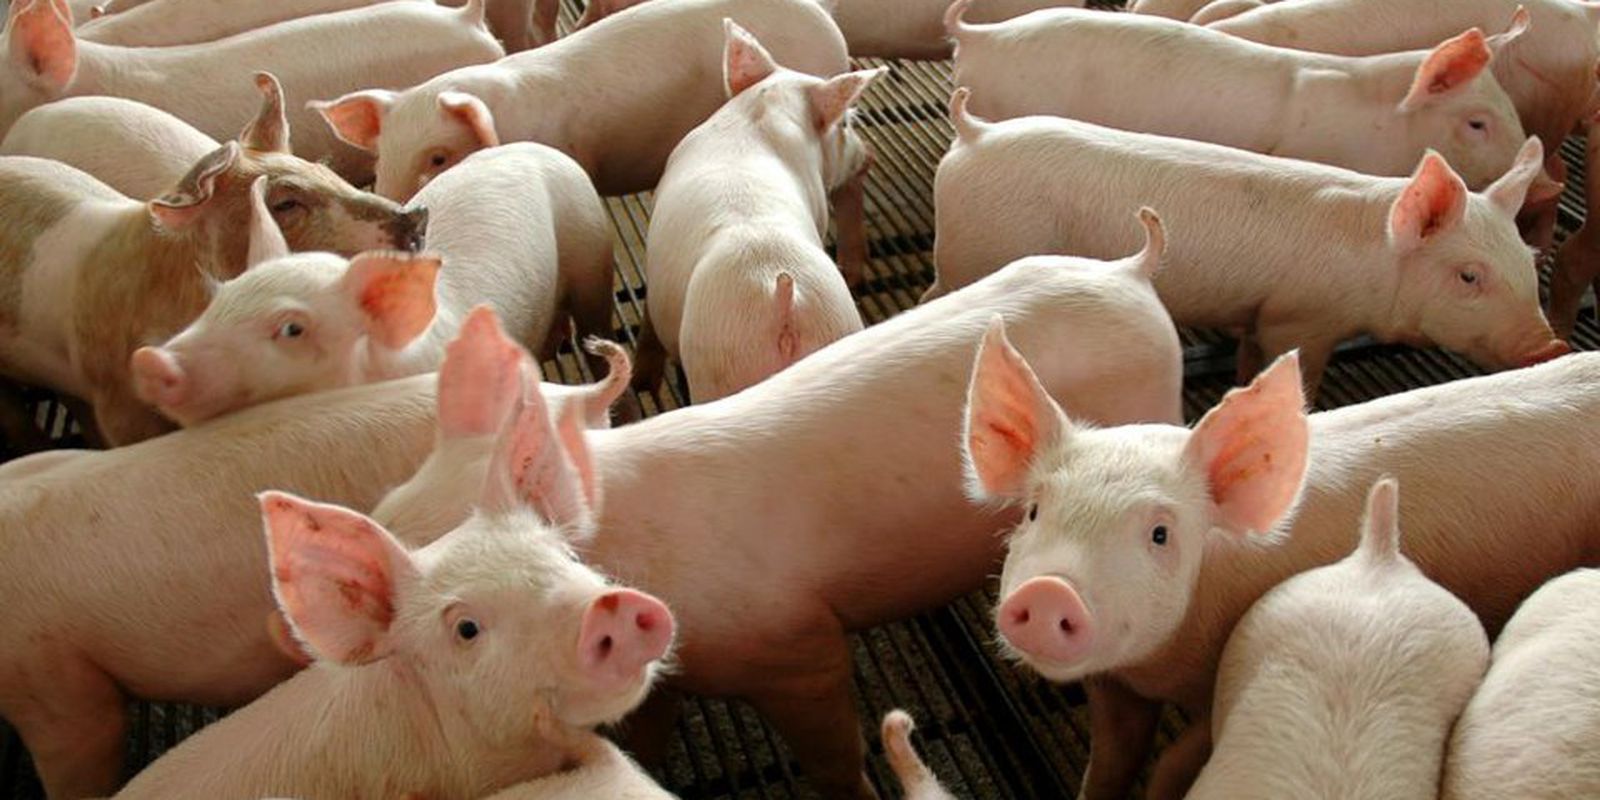 Government launches material to prevent African swine fever